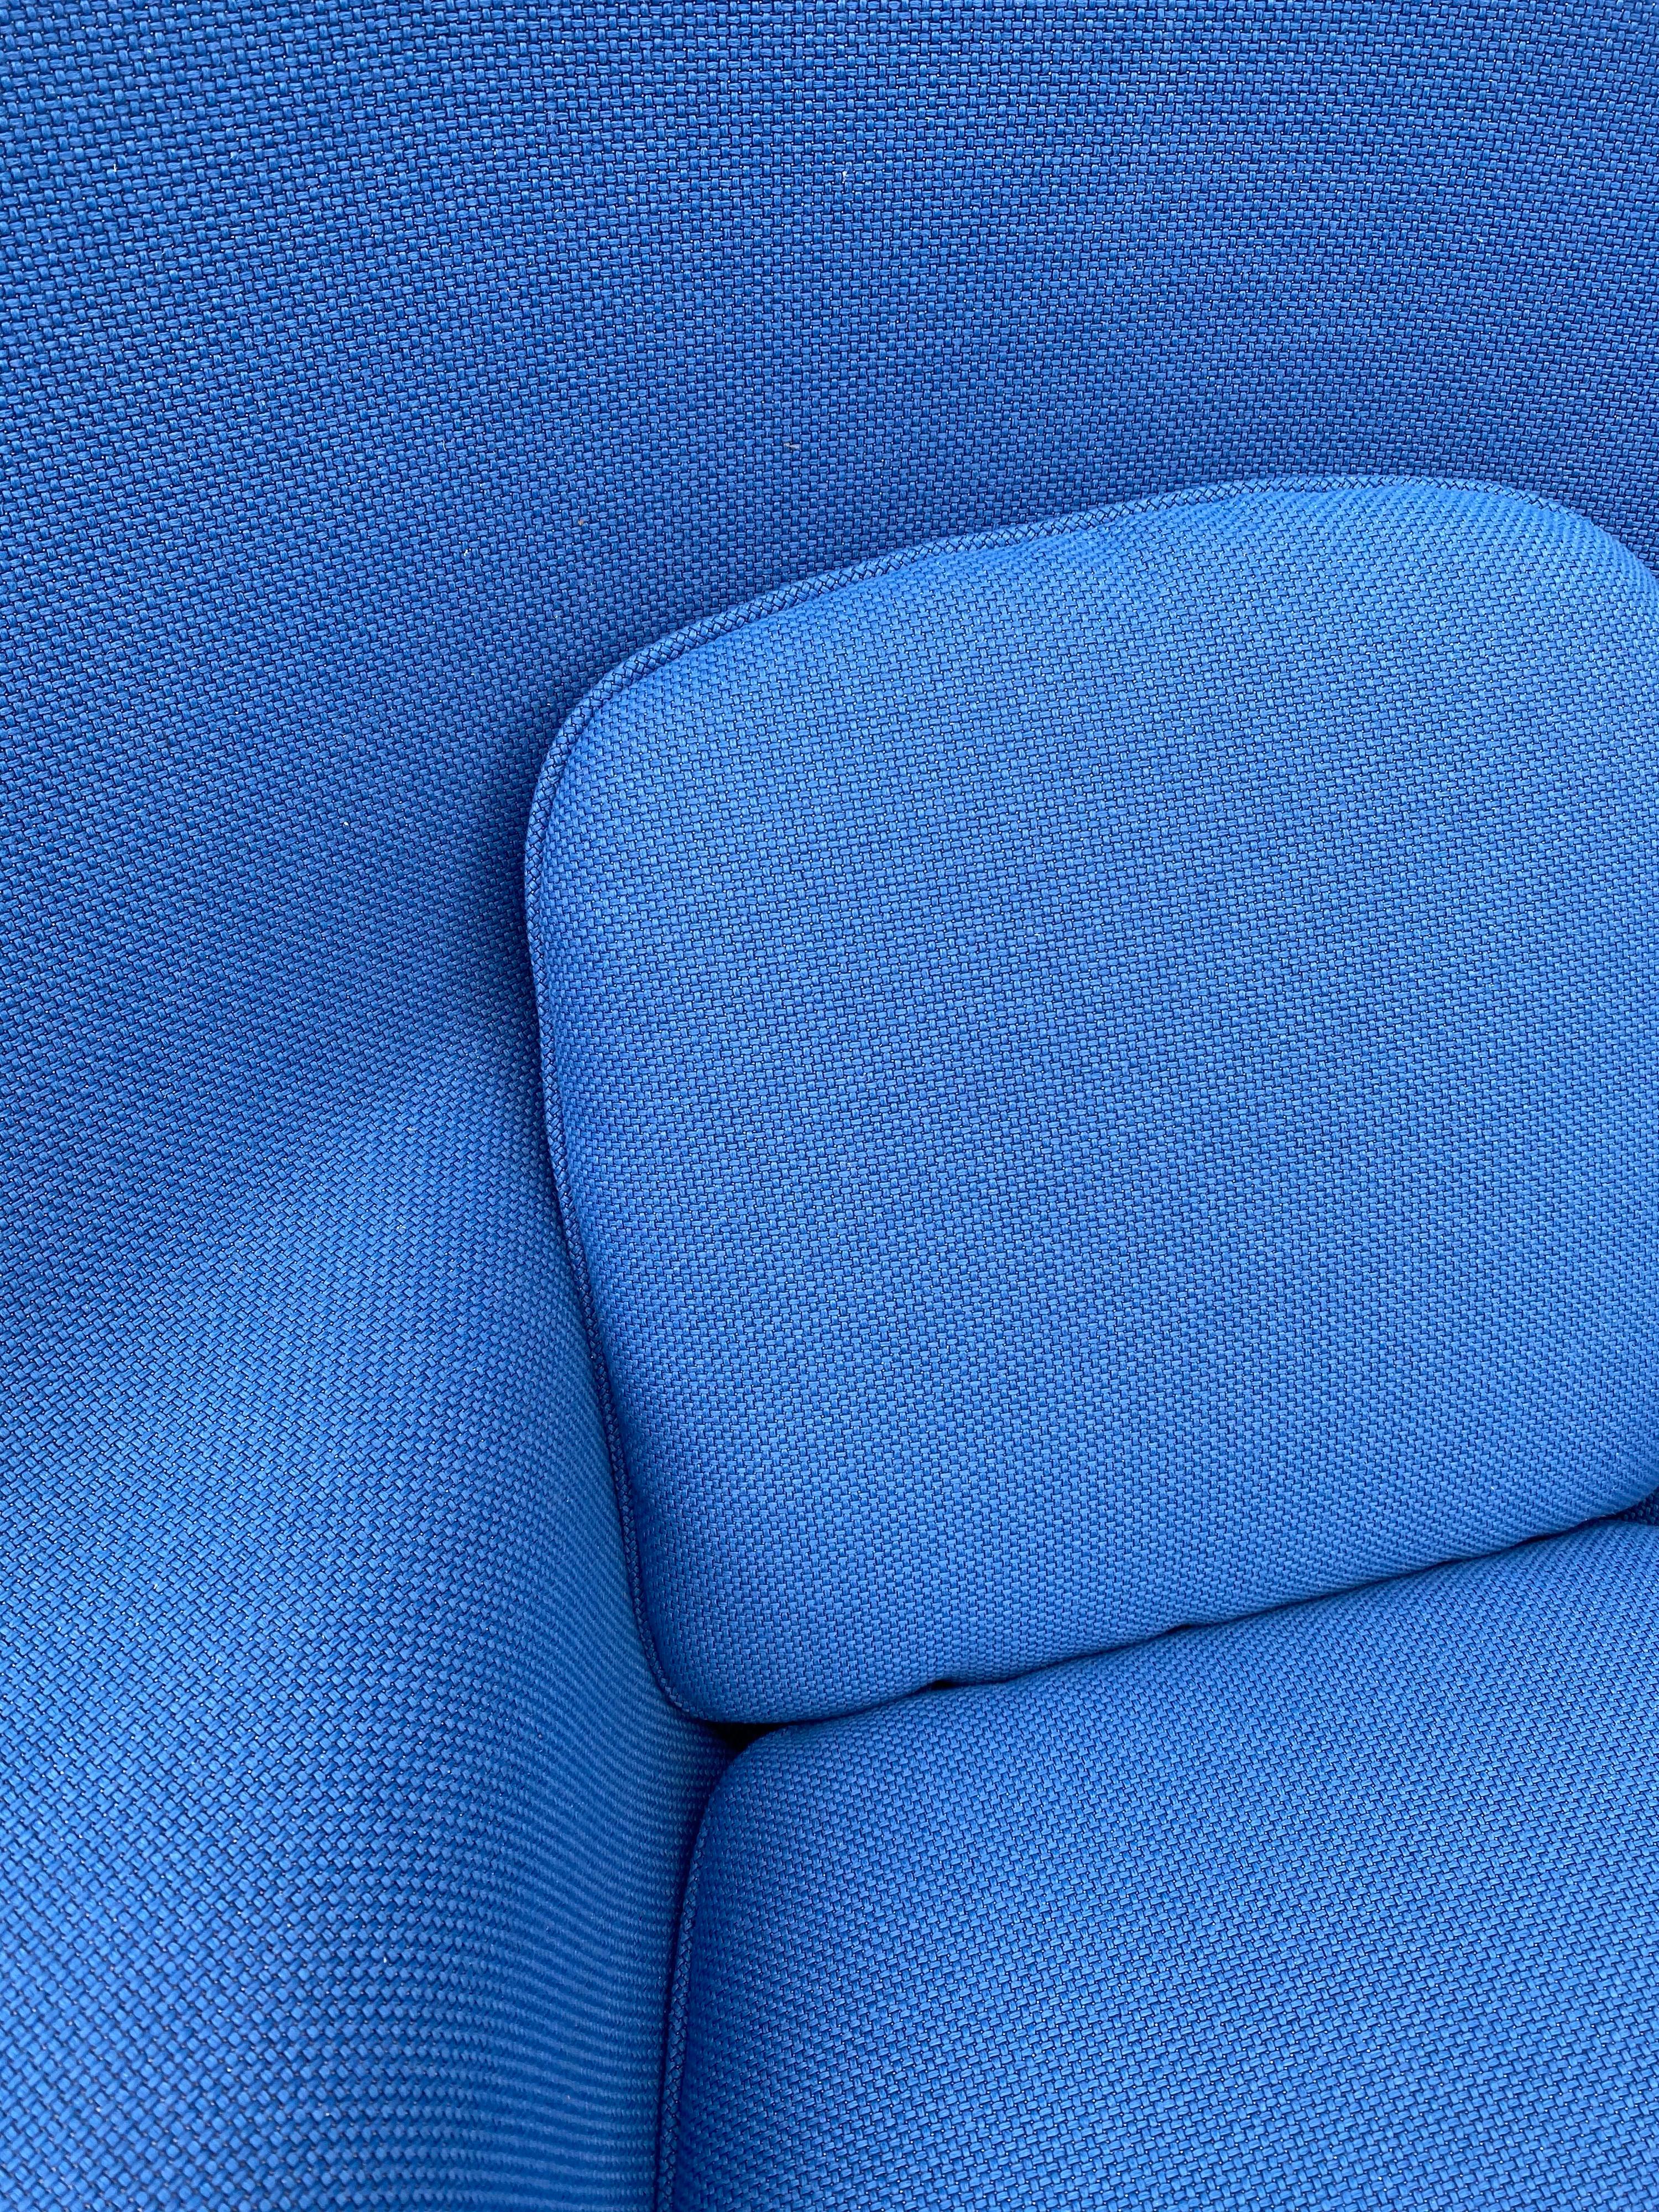 womb chair blue